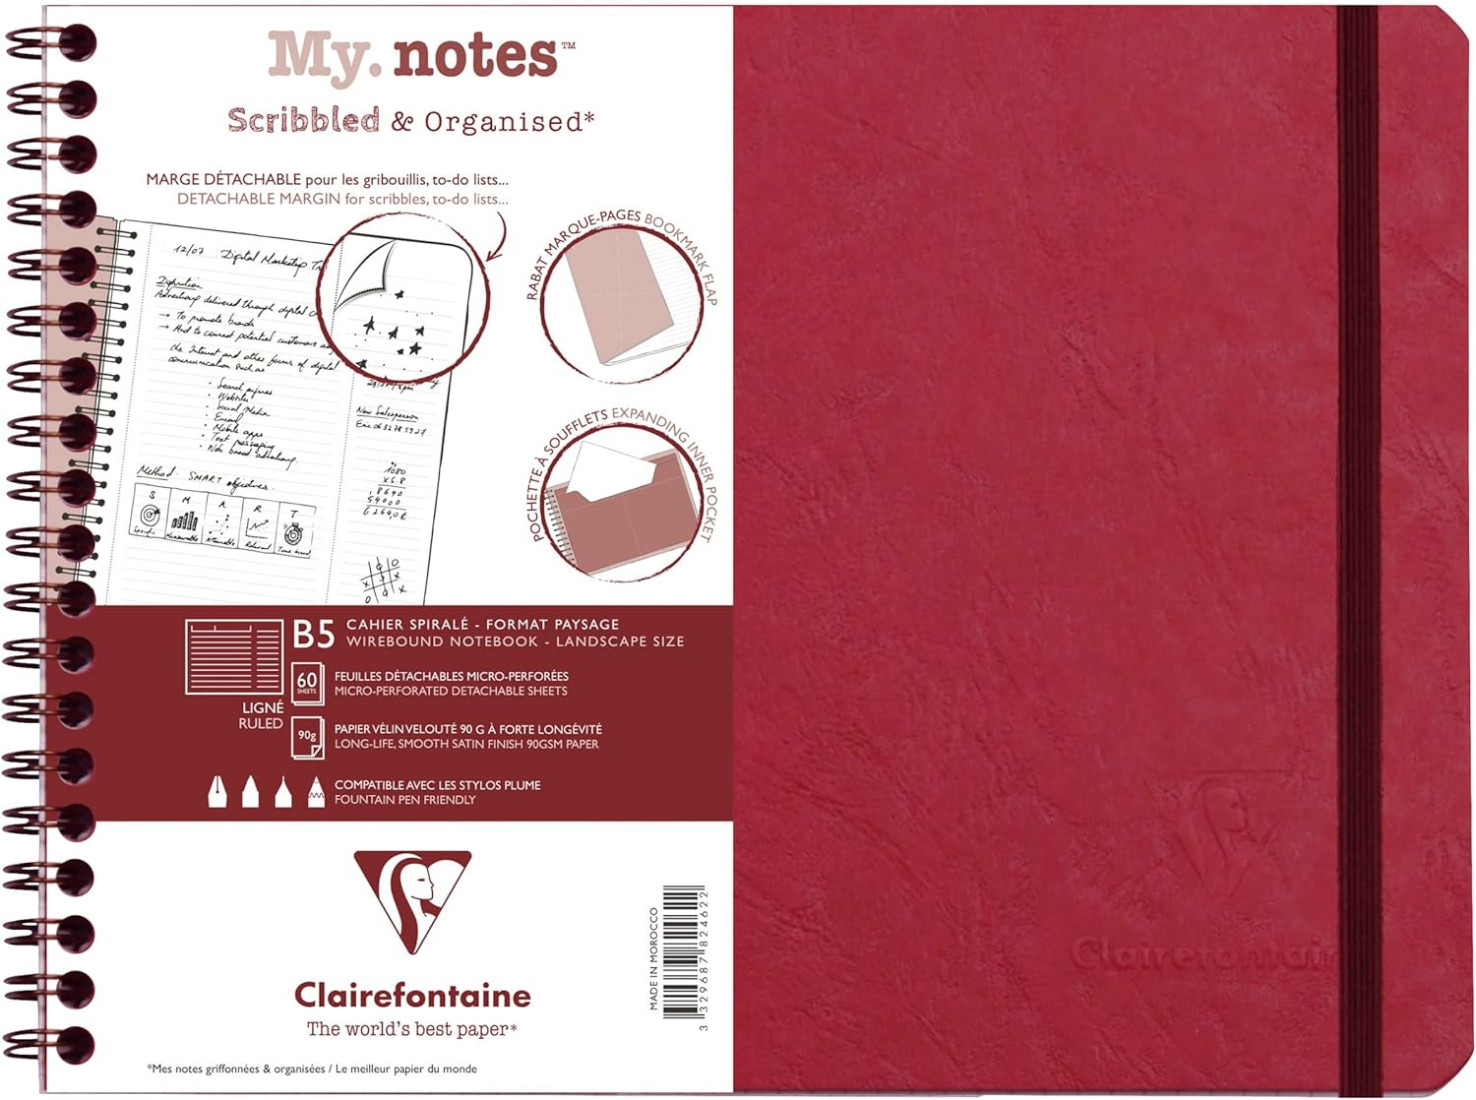 Clairefontaine Rhodia 78246C Age Bag A Spiral Notebook with Detachable Margins My.Notes Red - B5 landscape 25x19 cm - 120 Ruled Detachable Pages - 90 g white paper - Glossy Leather Grain Card Cover